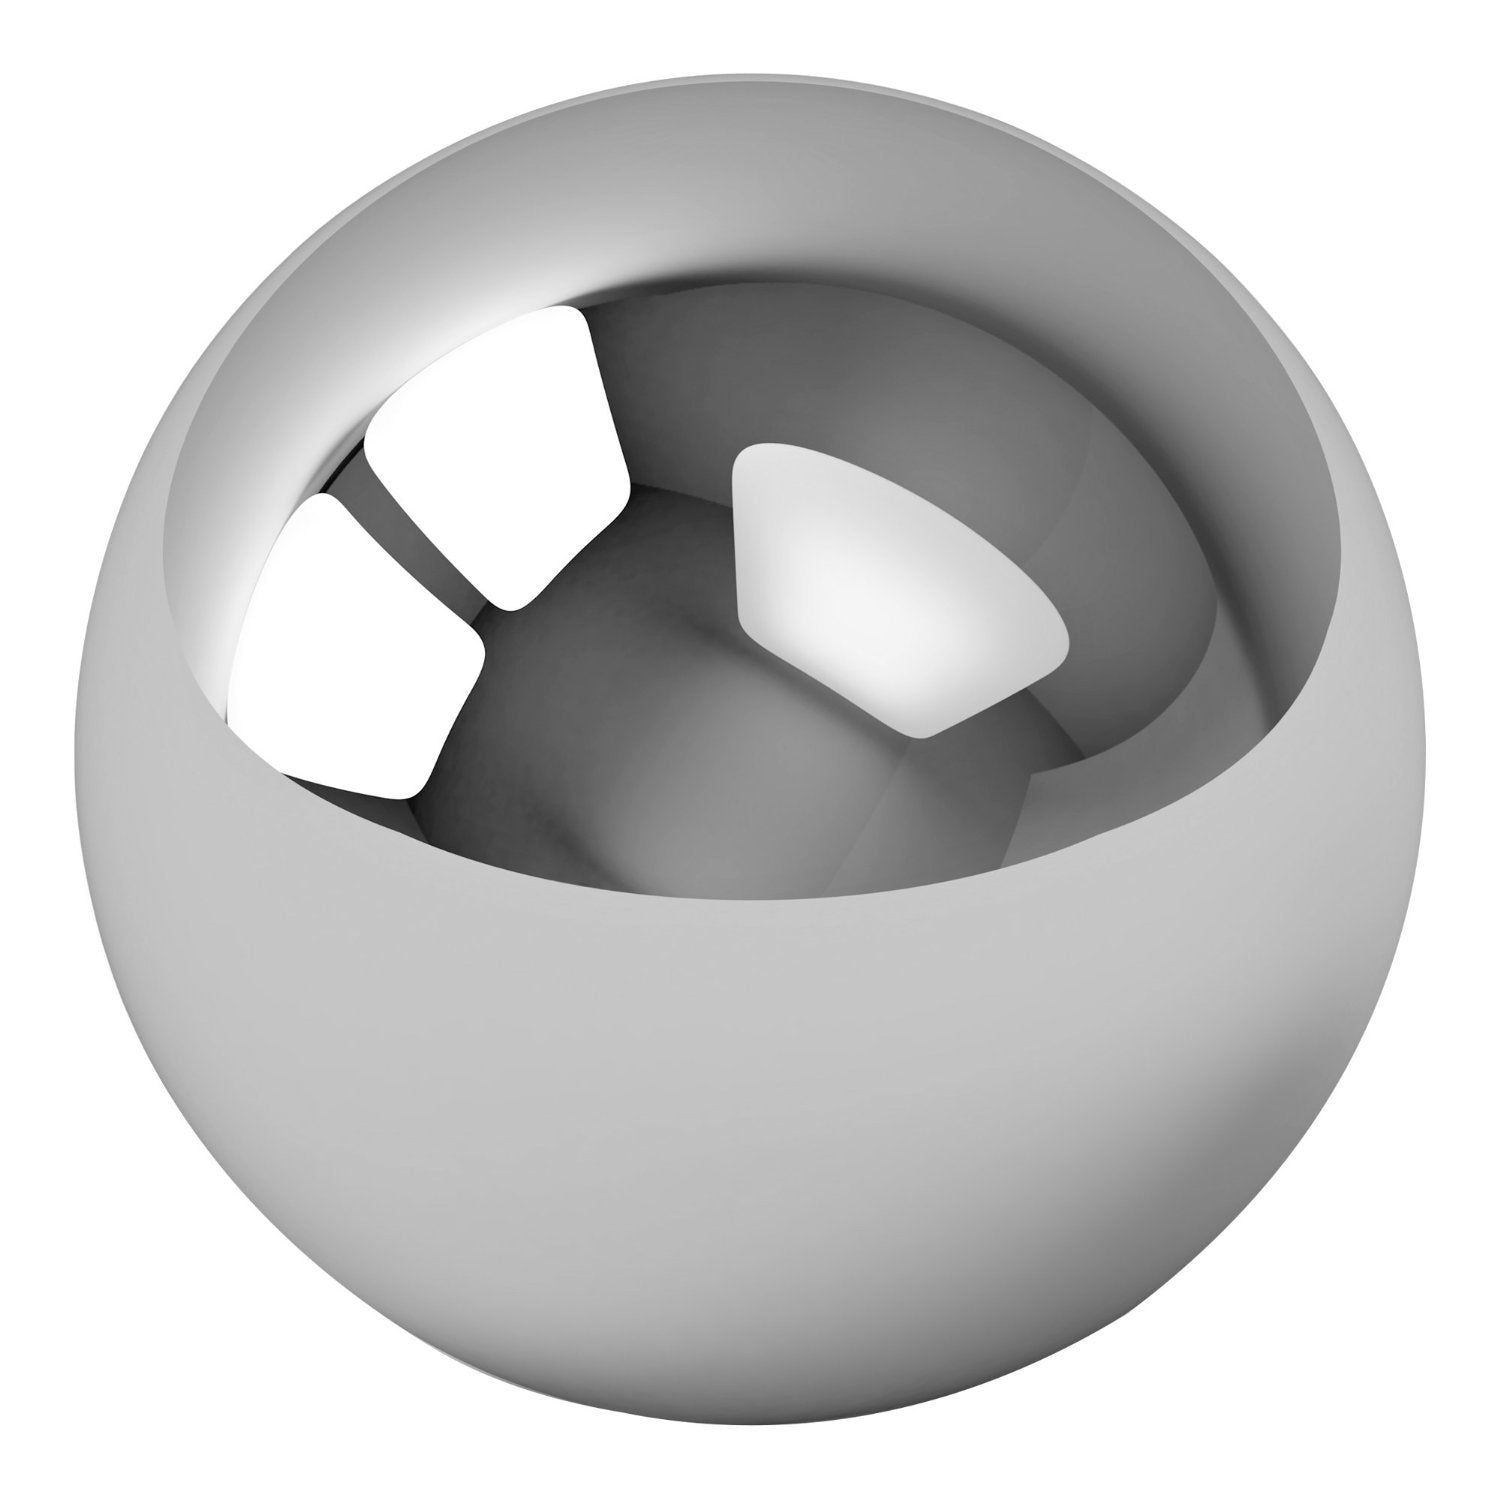 Stainless steel ball 2.381 mm